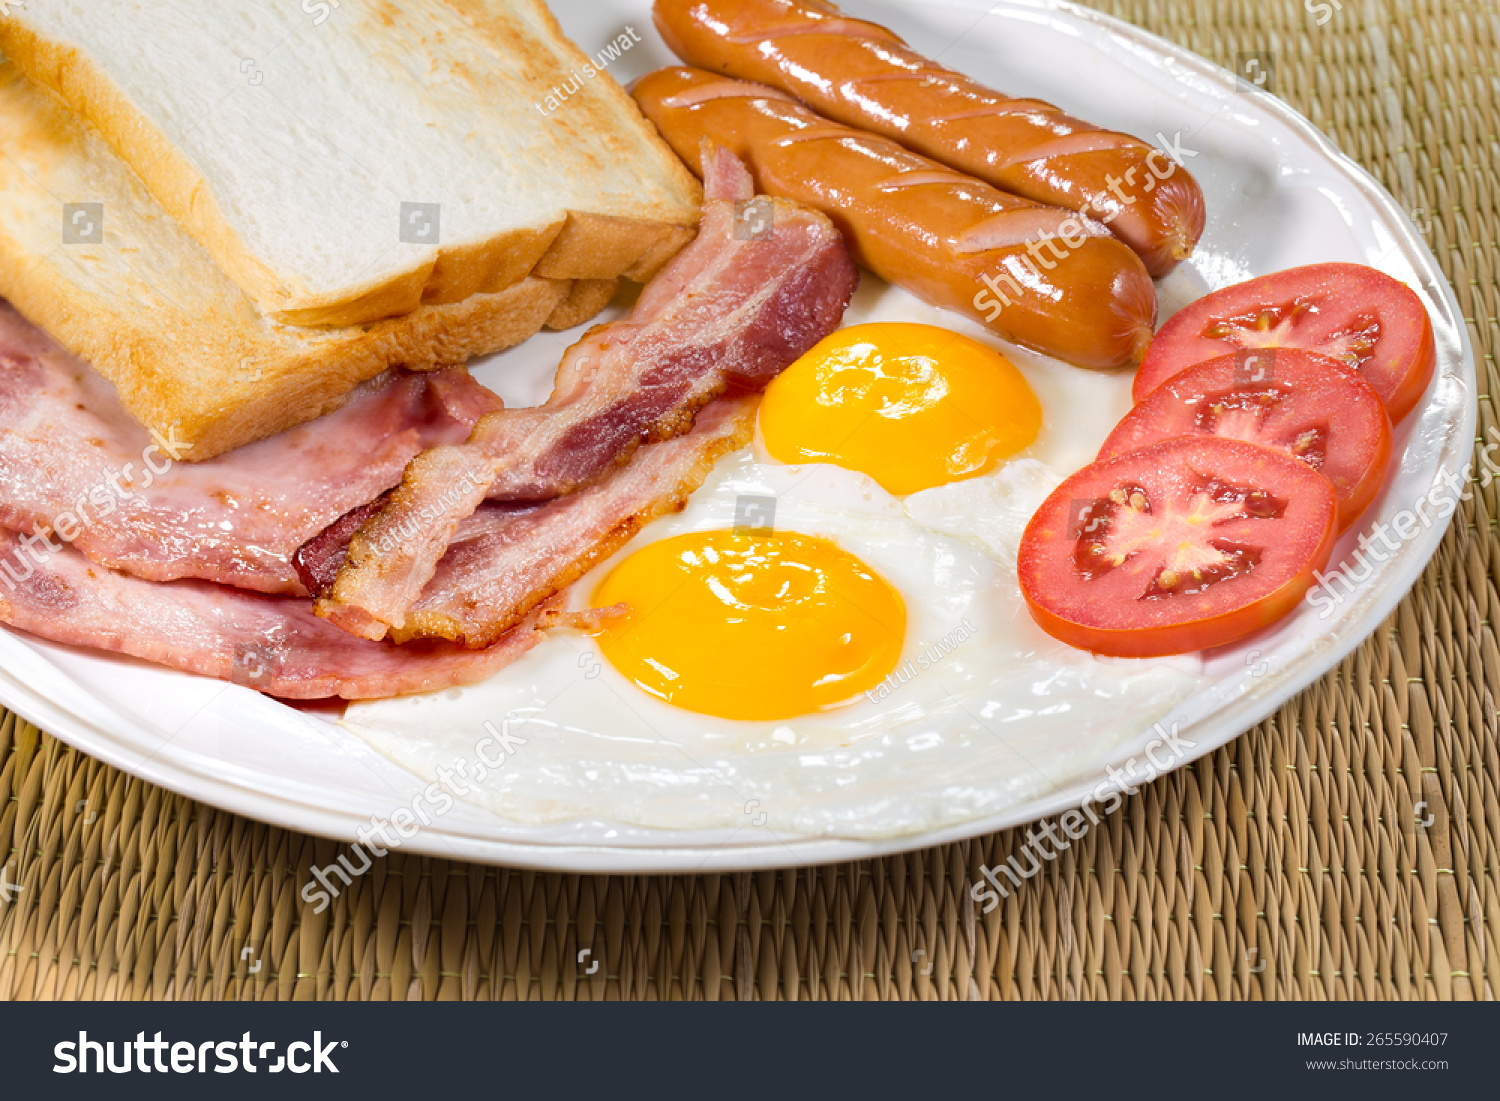 Delicious, American Breakfast, Bacon, Fried Egg And Ham Stock Photo ...